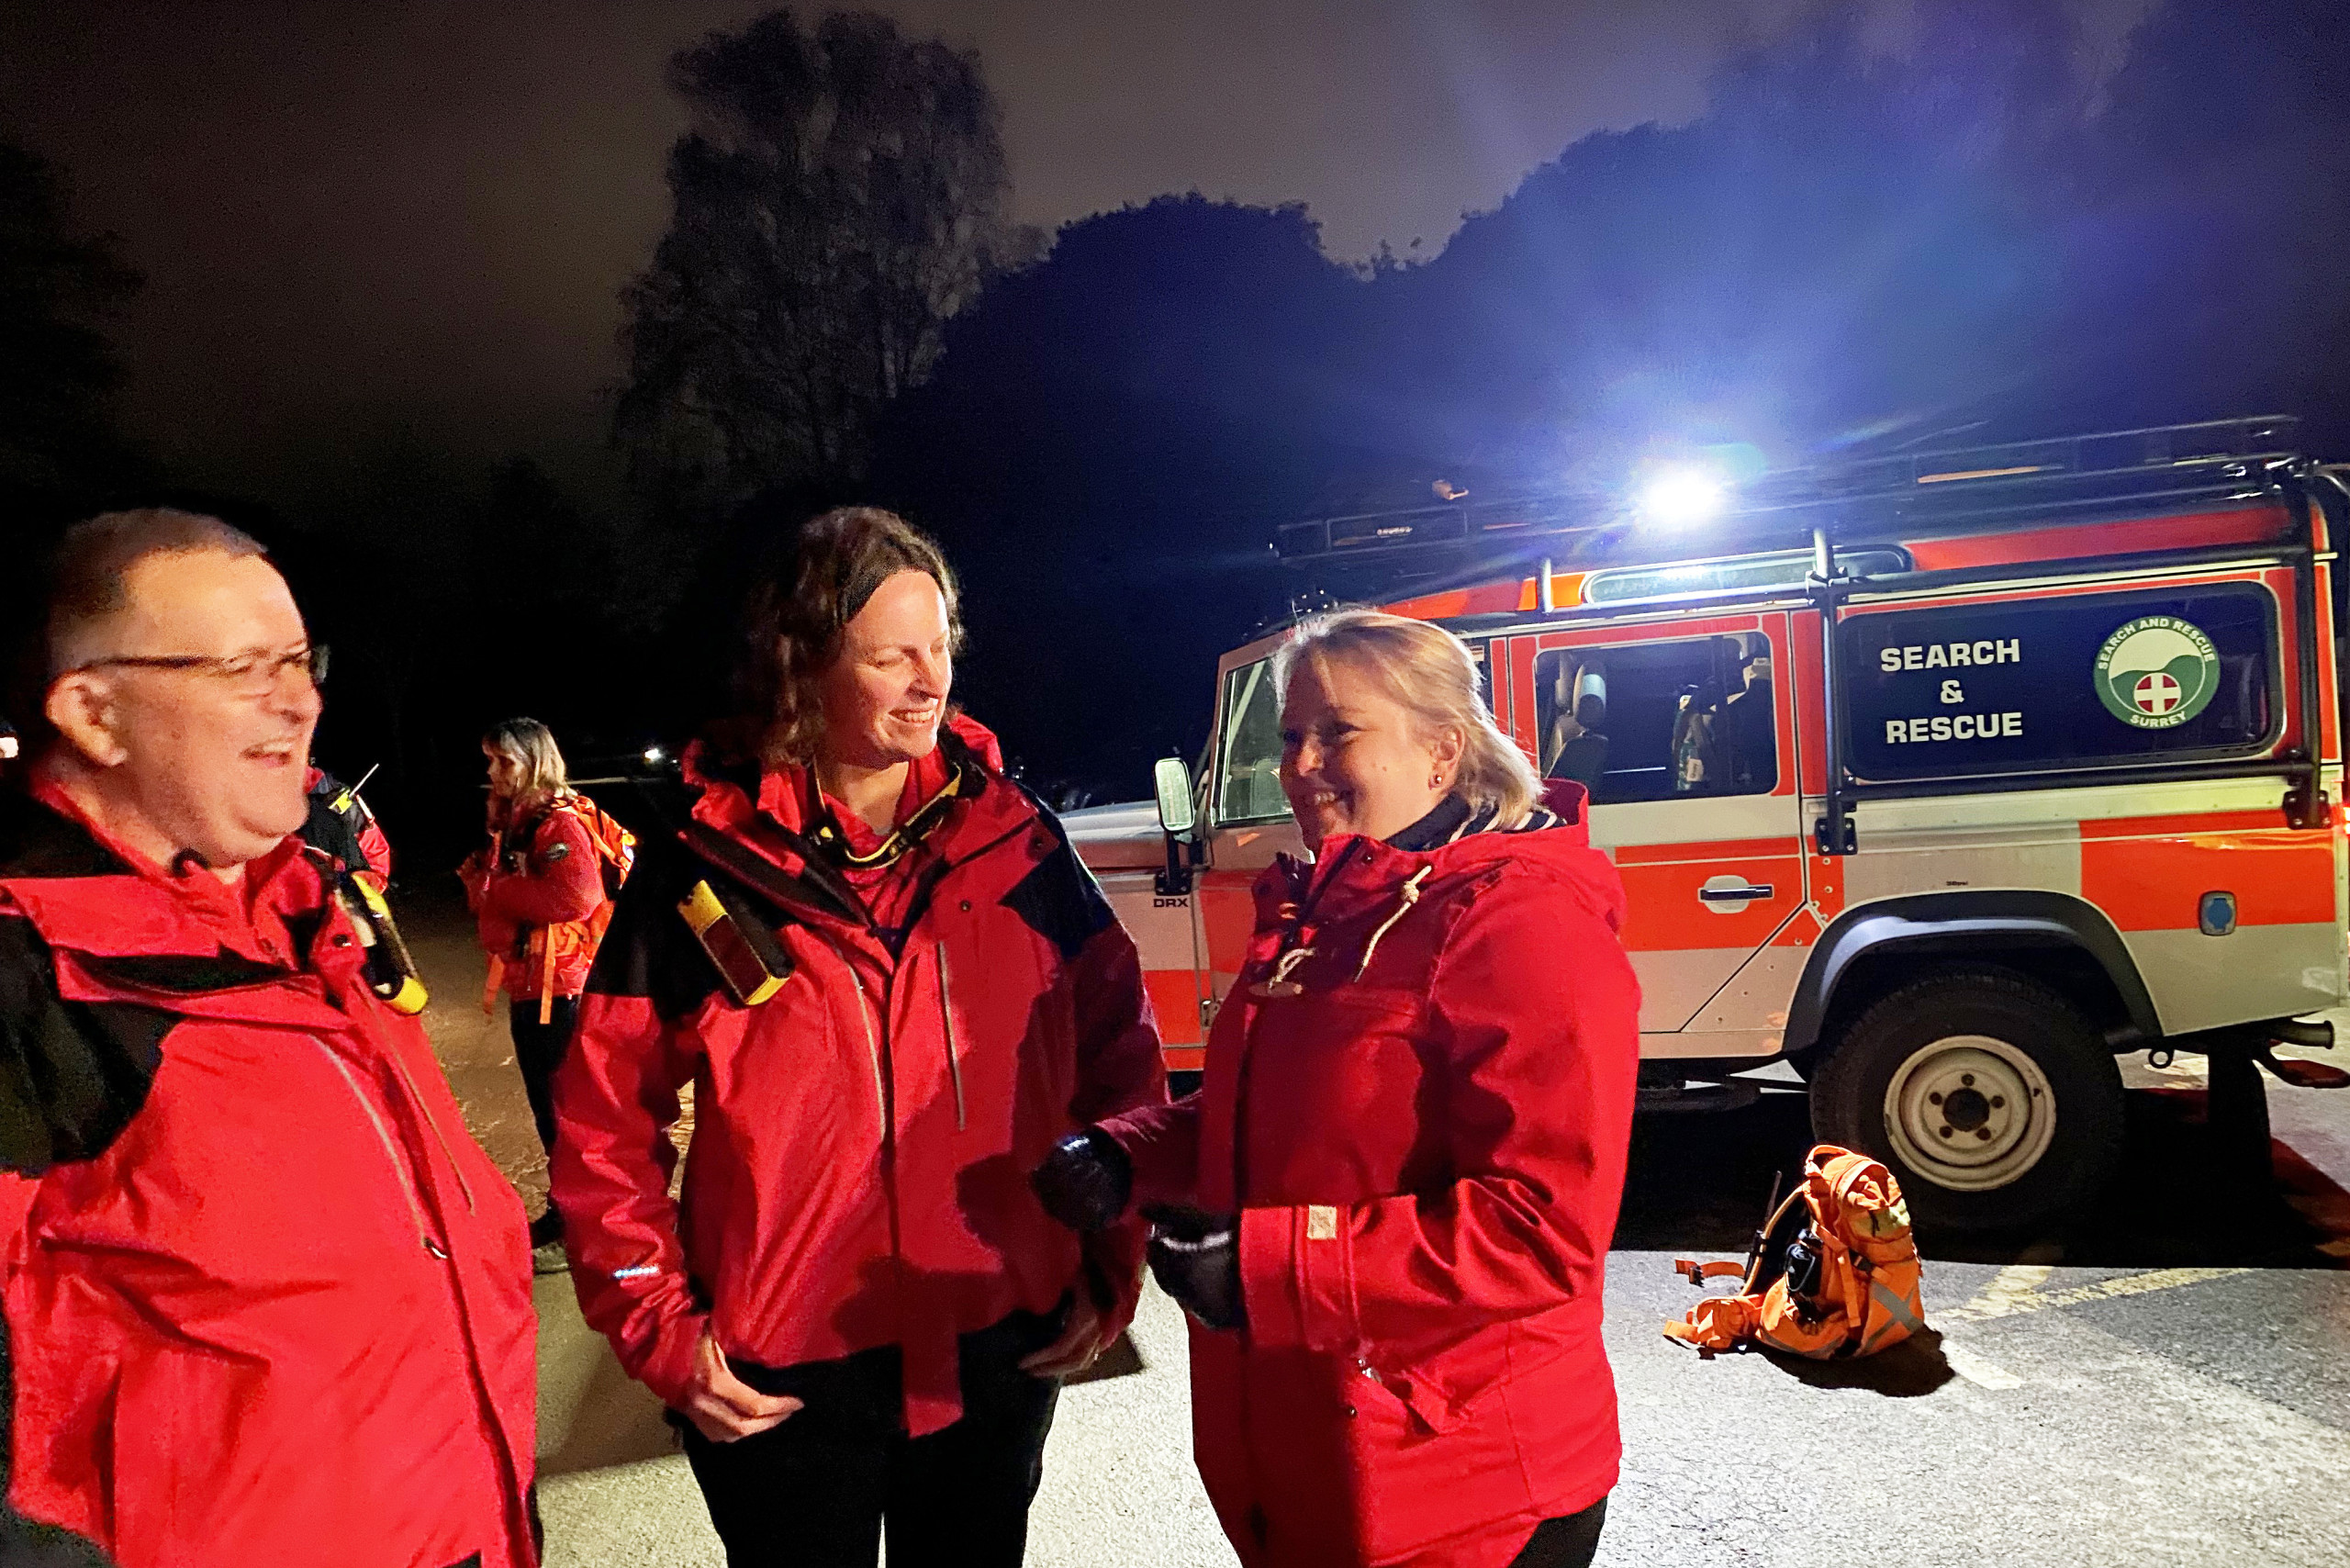 Police and Crime Commissioner Lisa Townsend with members of Surrey Search and Rescue at night